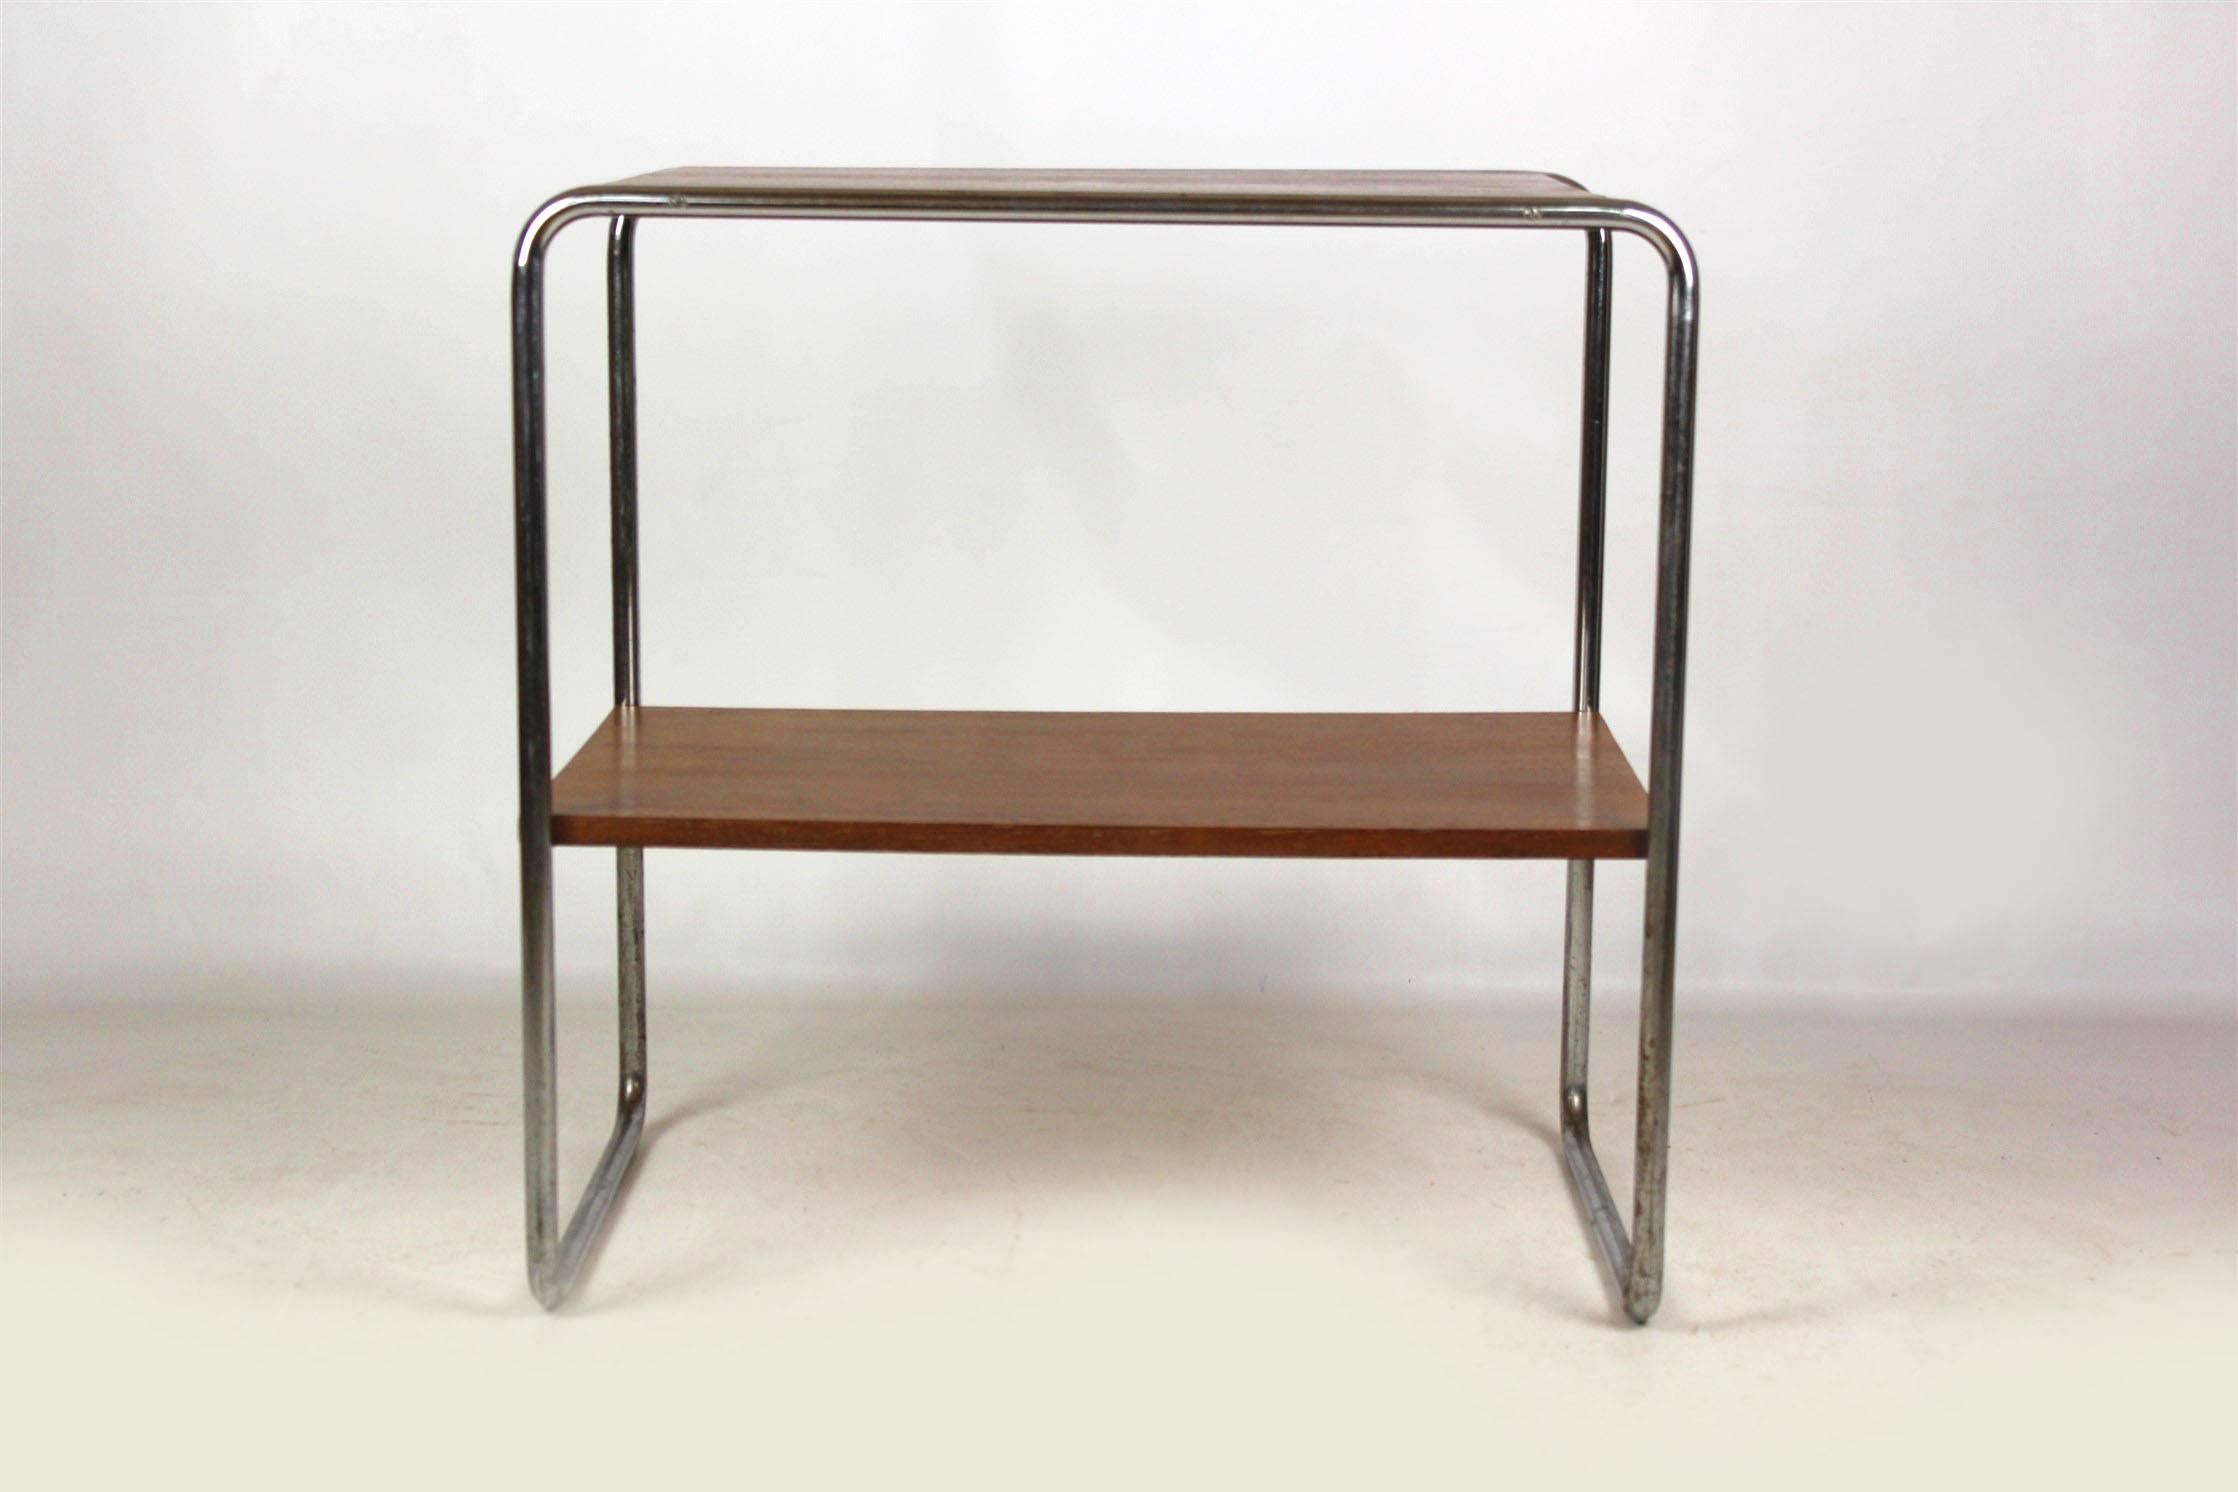 European B12 Console Table by Marcel Breuer for Thonet, 1930s